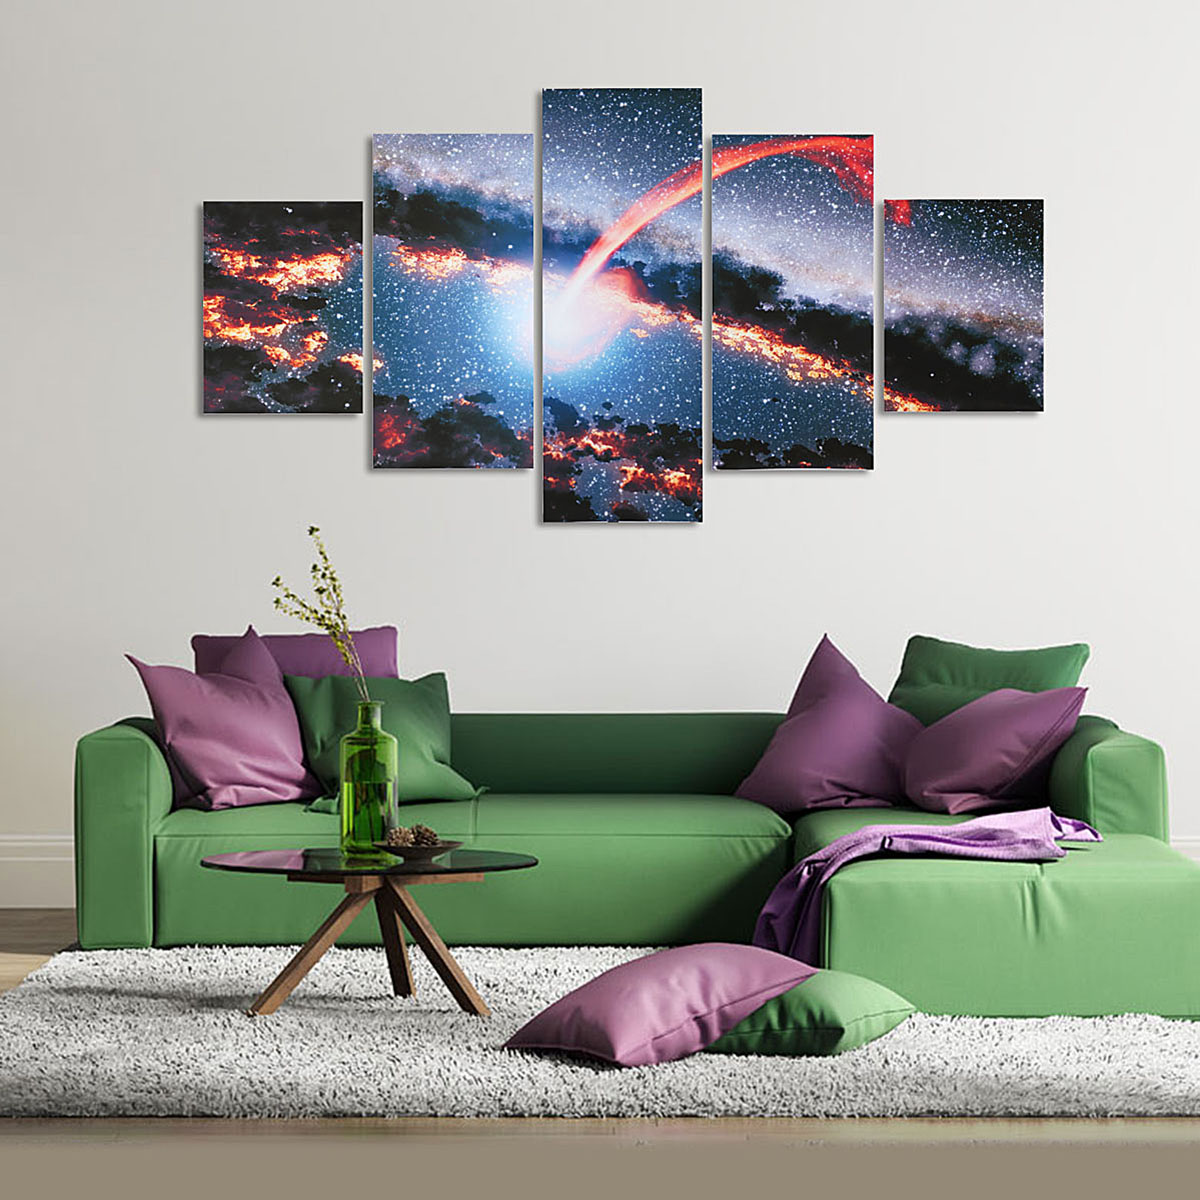 5Pcs-Canvas-Painting-Starry-Sky-Wall-Decorative-Print-Art-Pictures-Frameless-Wall-Hanging-Home-Offic-1803048-1